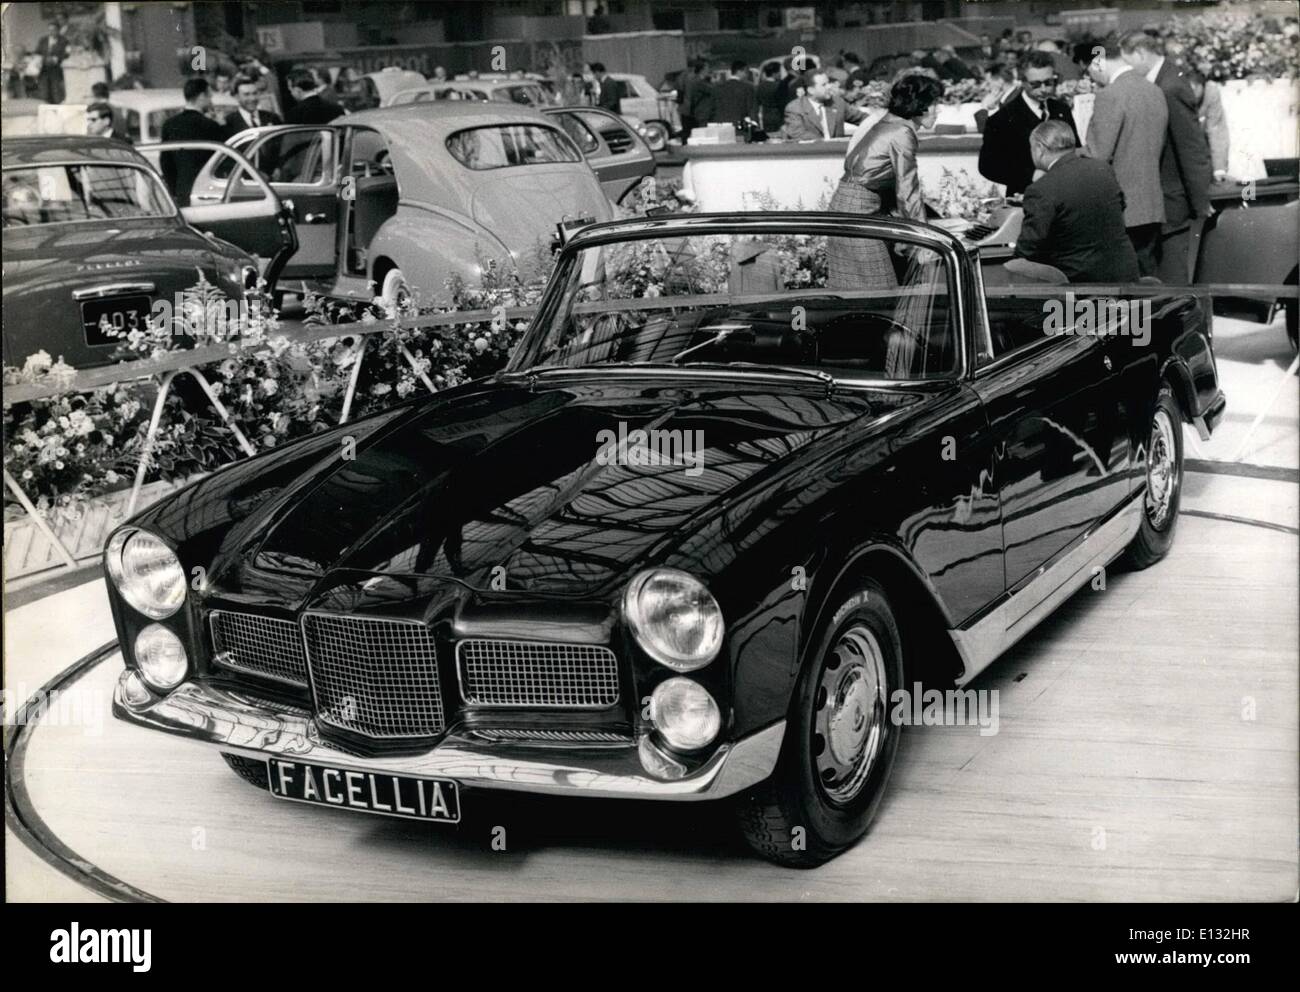 Feb. 26, 2012 - Opening of Paris Motor Show. The Facella , a new 9 C.V. Sporting Car presented by Facel-Vega, one of the features of the Paris Motor Show. Oct. 1st/59 Stock Photo